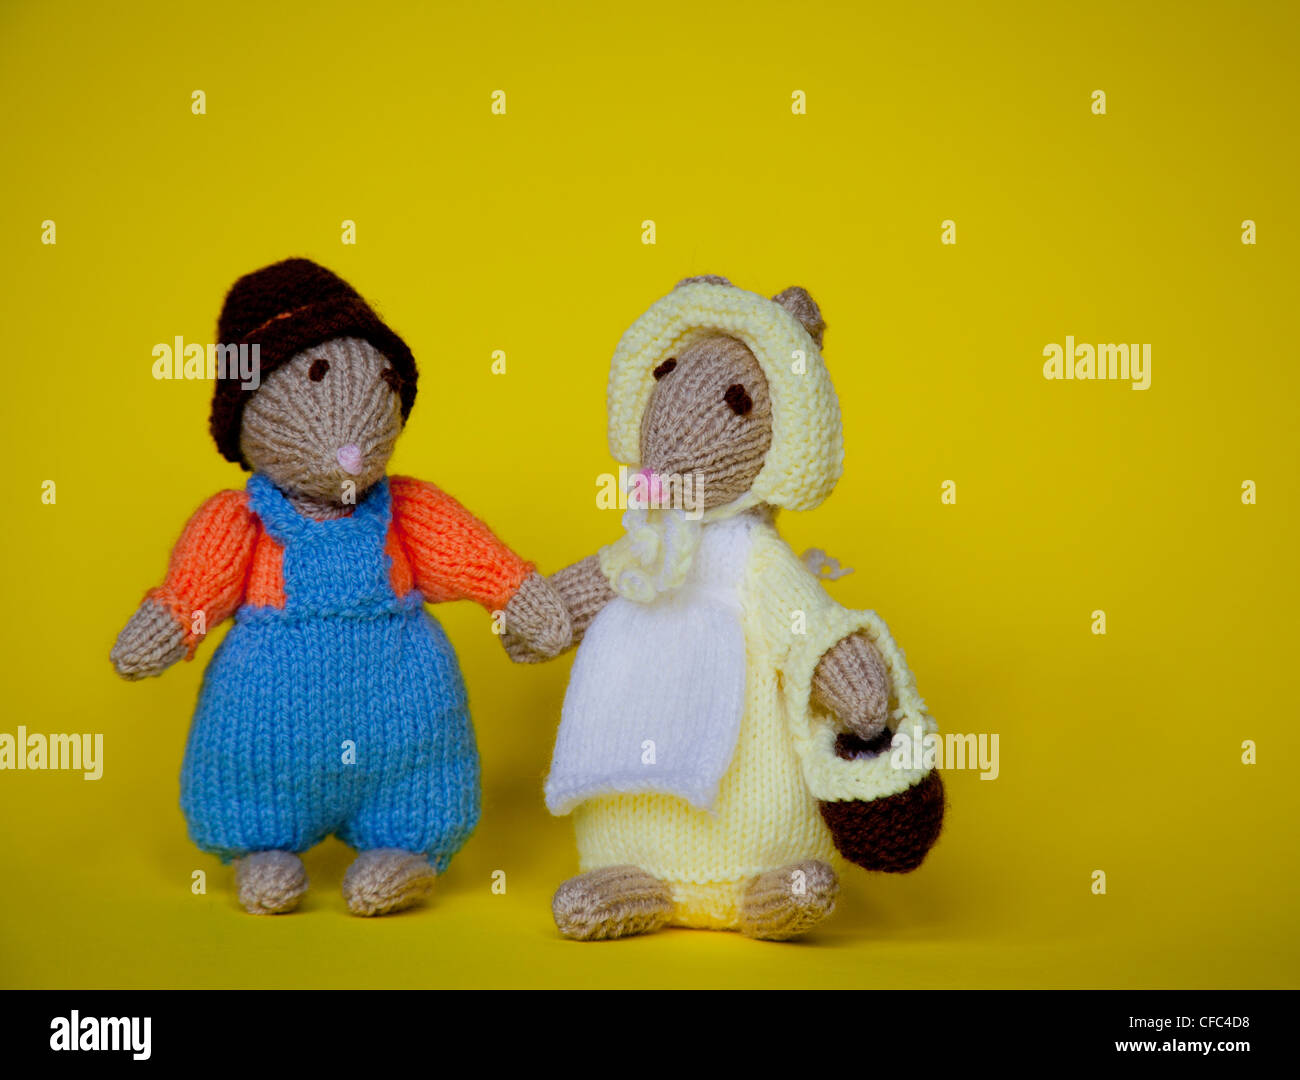 Woollen mice, togetherness, friendship, knitted toys Stock Photo